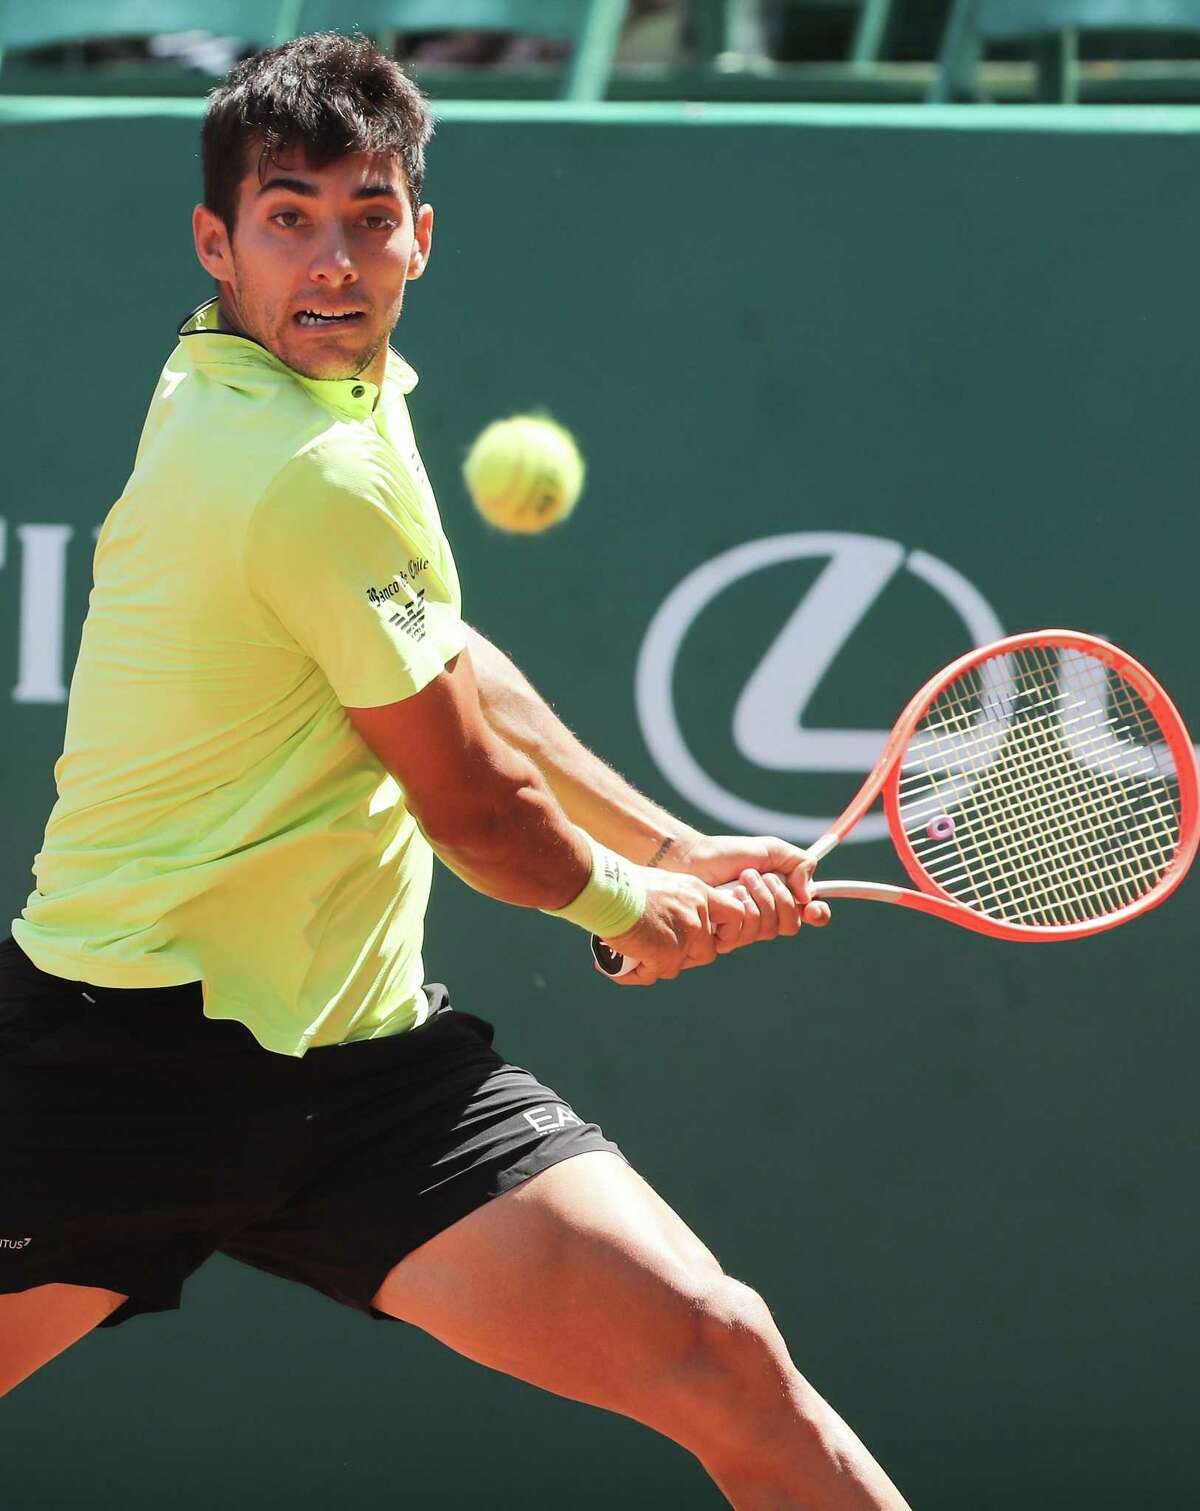 Christian Garin, CHI, returns a serve to Jordan Thompson, AUS during the second round of the Fayez Sarofim & Co. U.S. Men’s Clay Court Championship at River Oaks Country Club in Houston on Thursday, April 7, 2022.